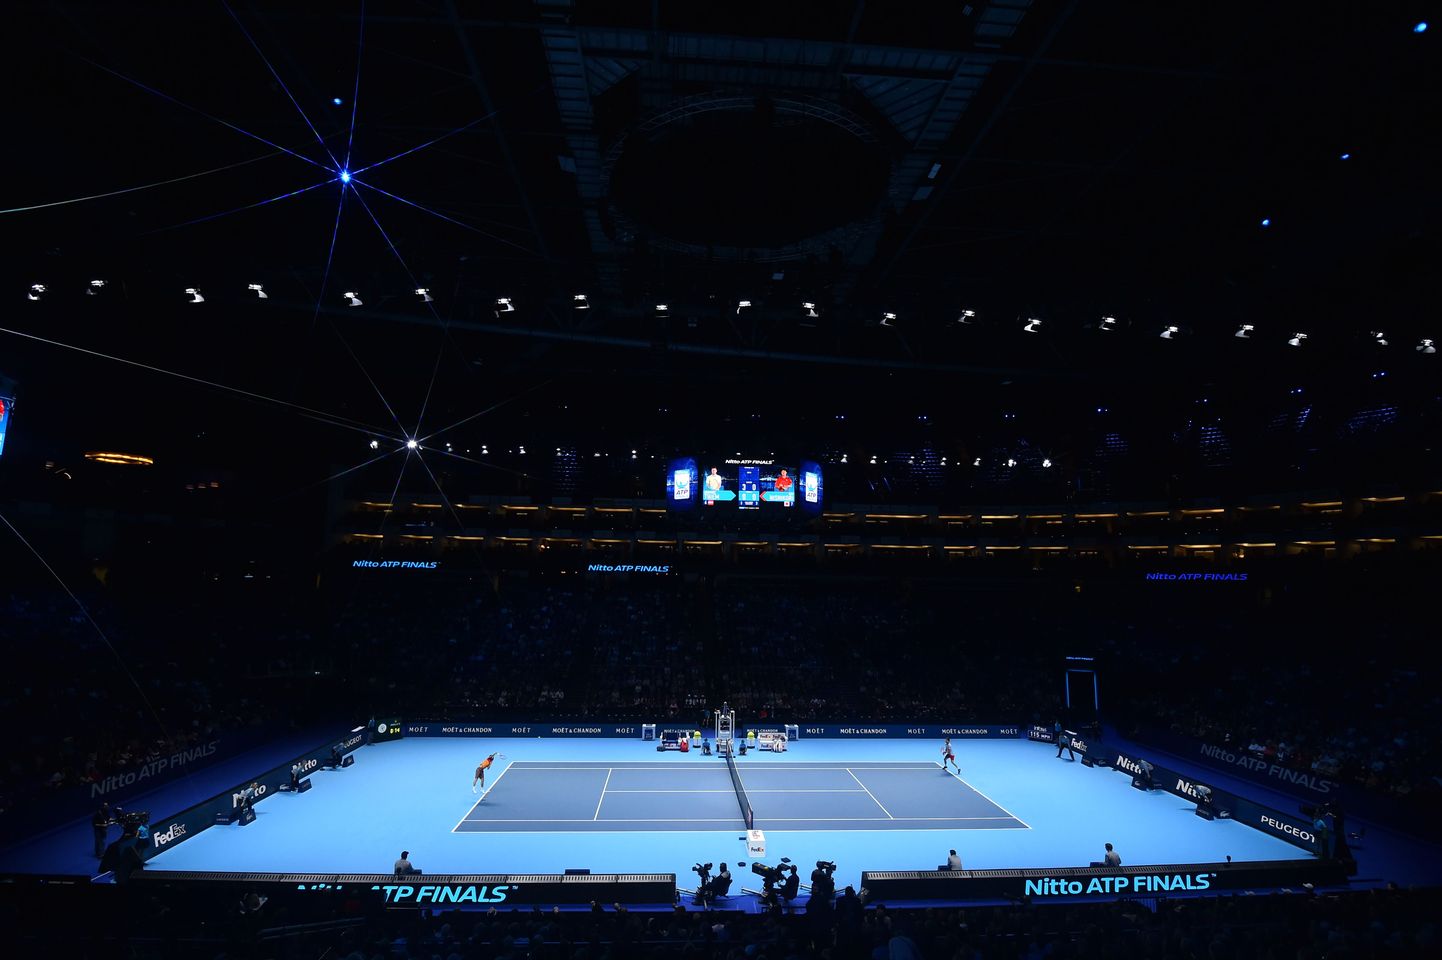 Austria's Dominic Thiem (R) plays against Japan's Kei Nishikori (L) during their men's singles round-robin match on day five of the ATP World Tour Finals tennis tournament at the O2 Arena in London on November 15, 2018. (Photo by Glyn KIRK / AFP)